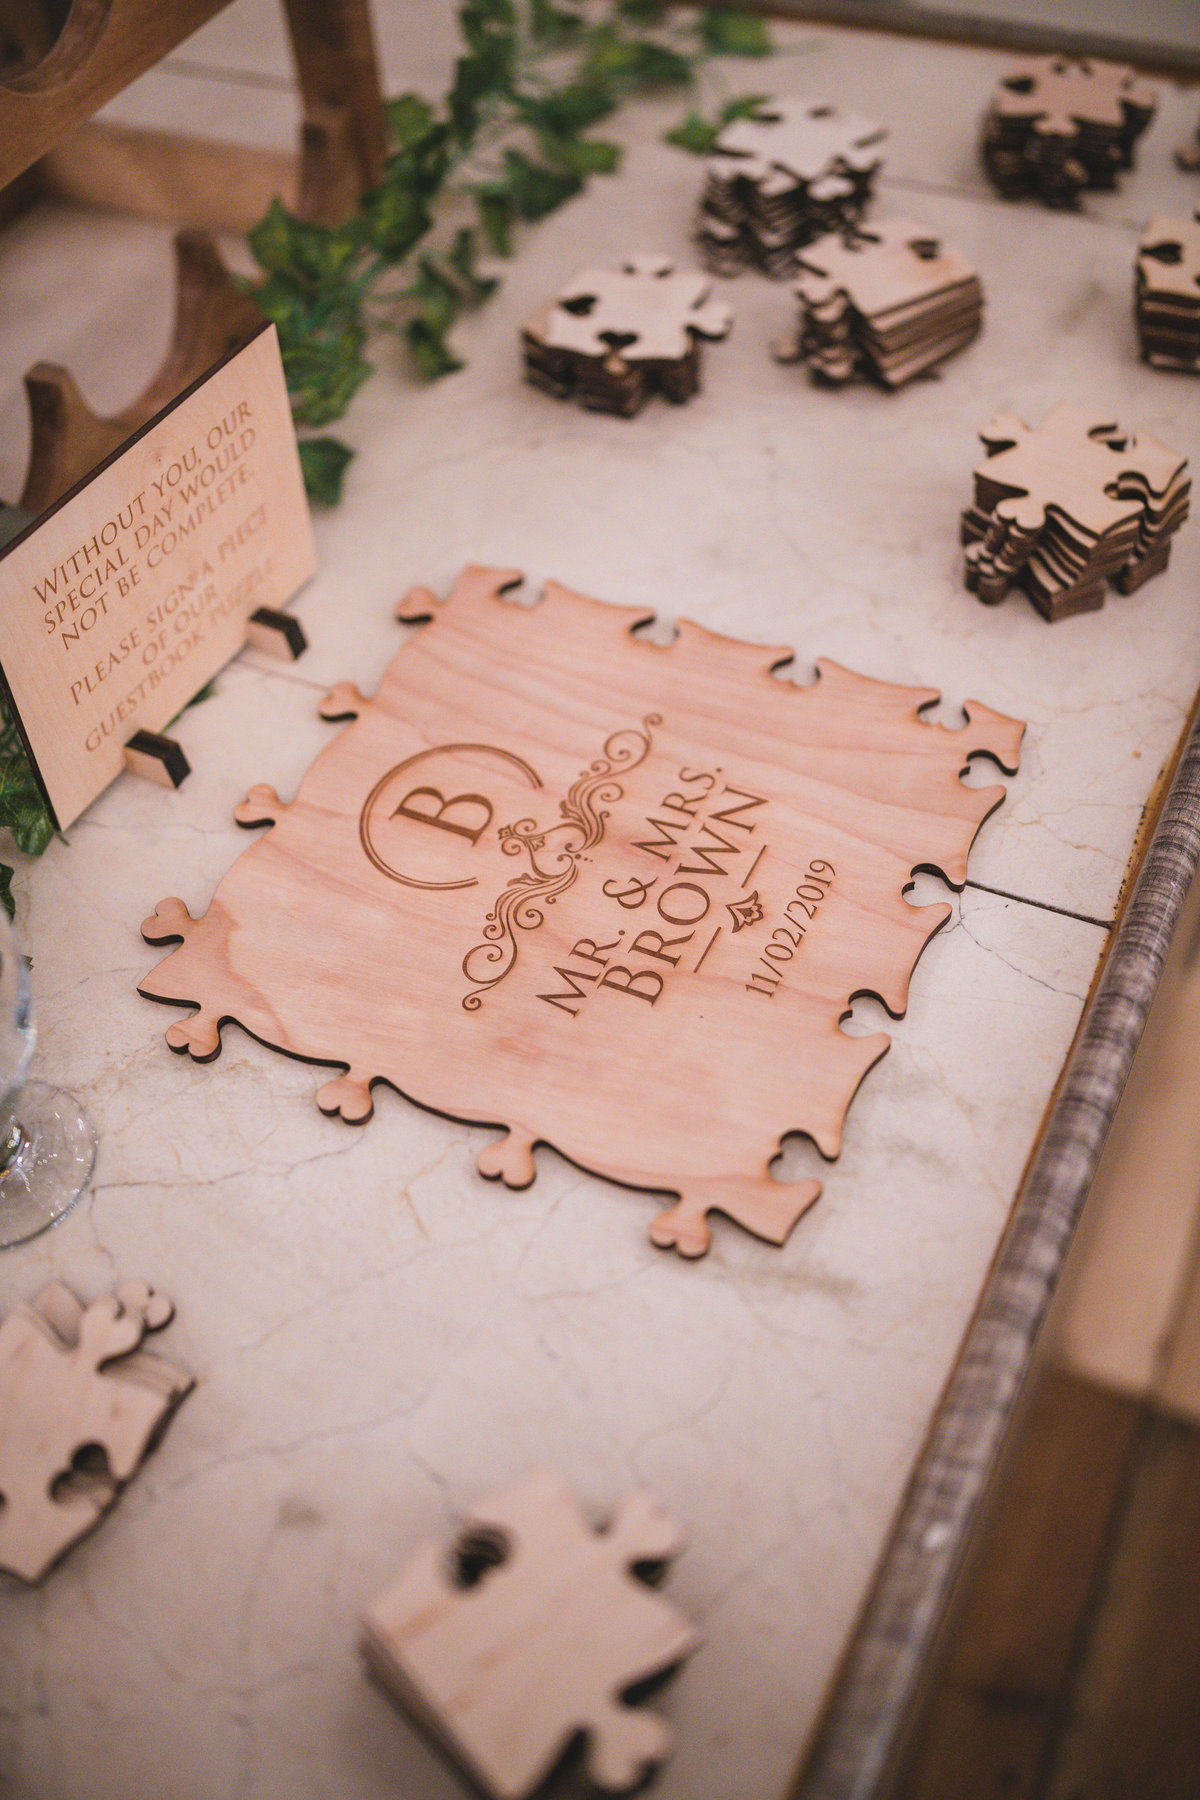 stationary puzzle sign from wedding reception at The Vineyards at Aquebogue